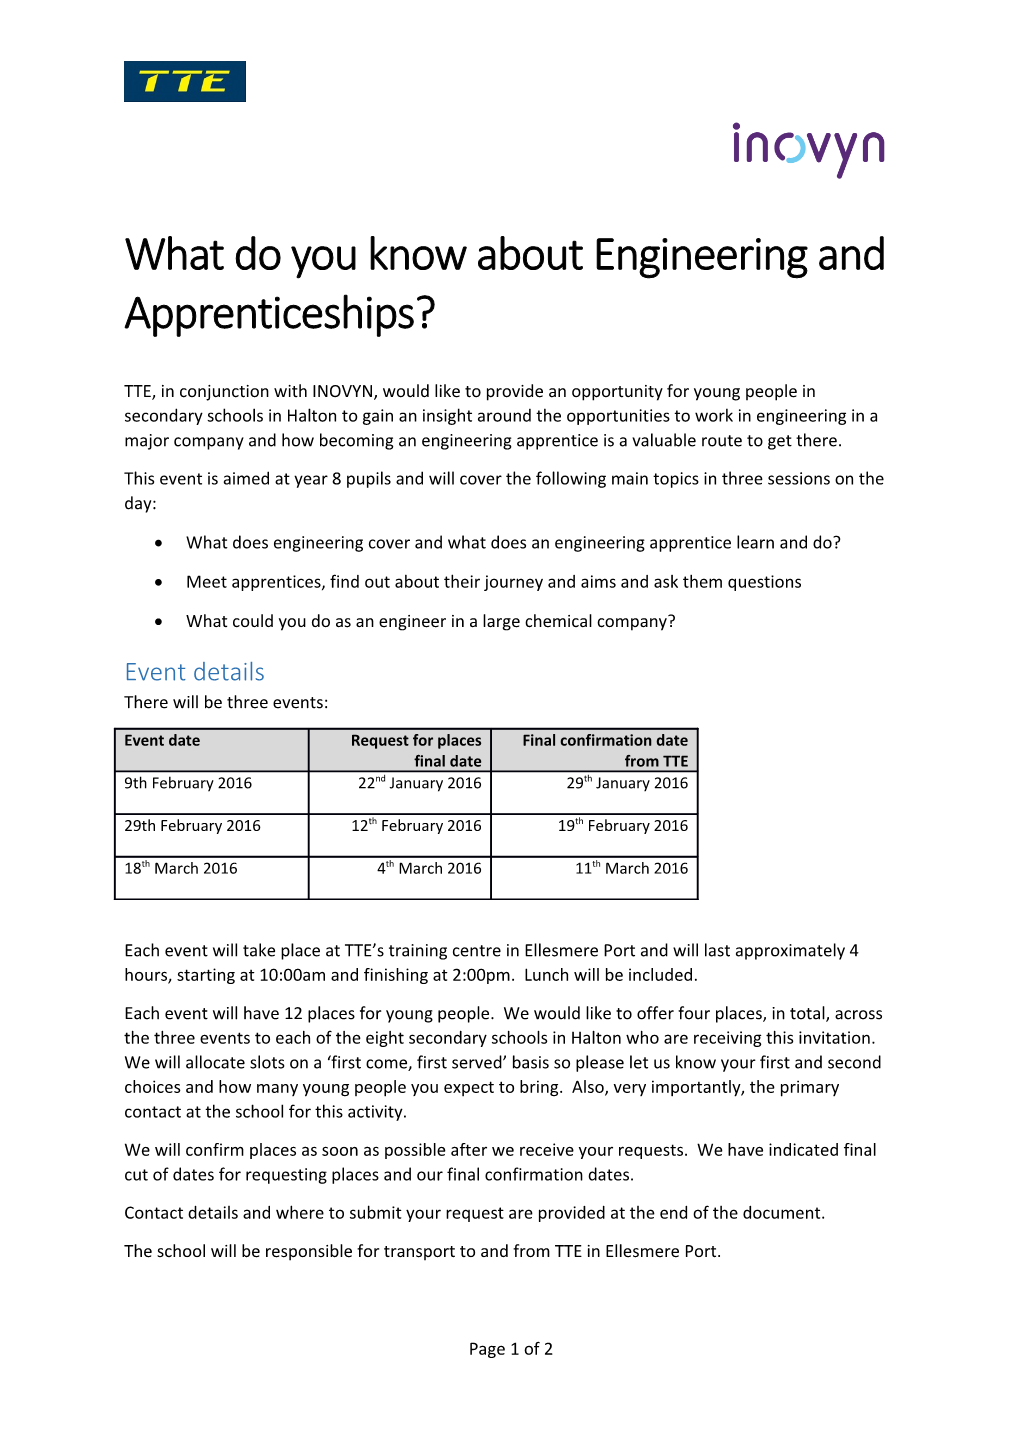 What Do You Know About Engineering and Apprenticeships?